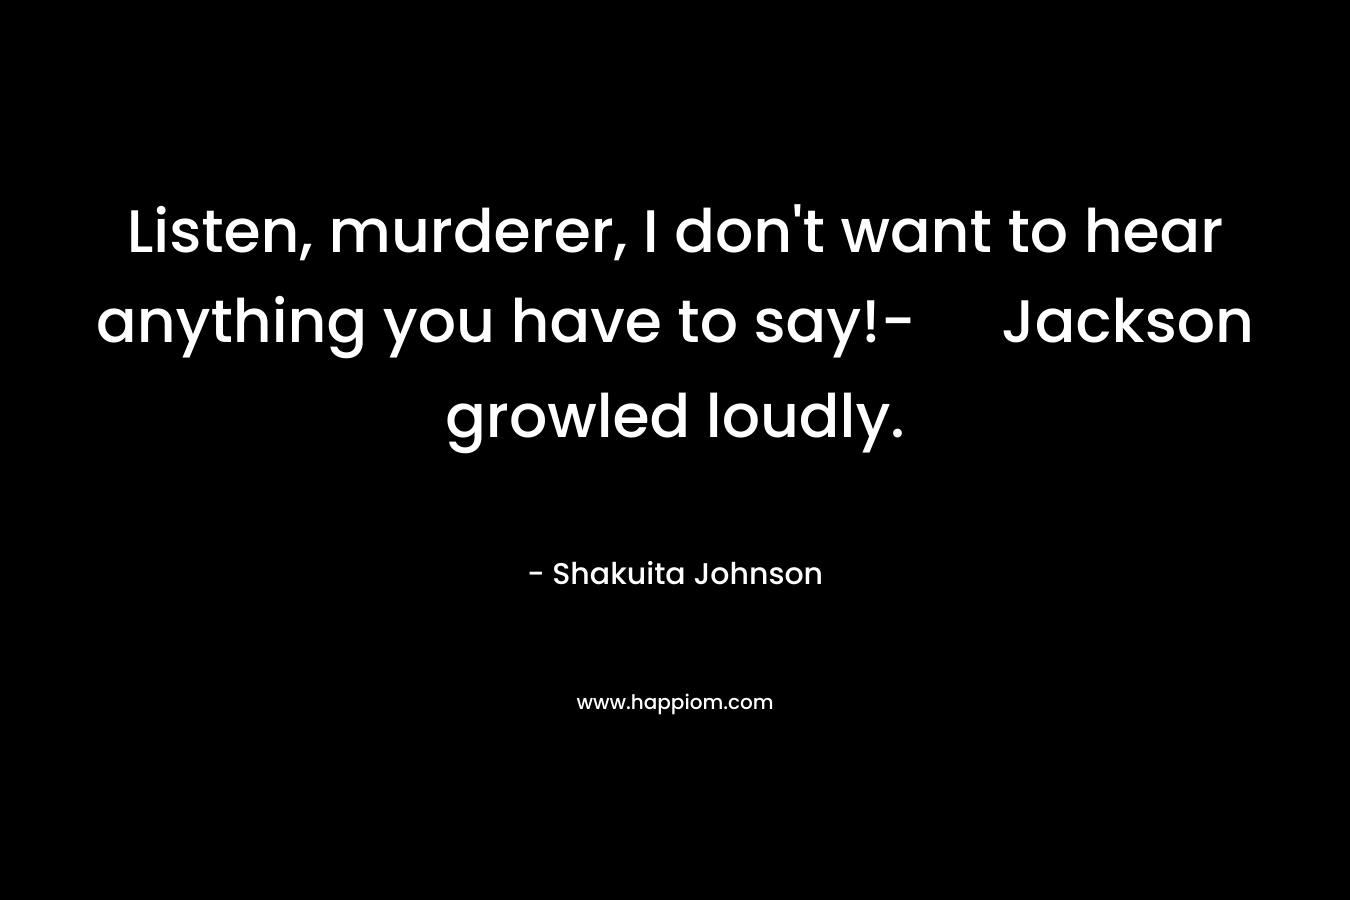 Listen, murderer, I don't want to hear anything you have to say!- Jackson growled loudly.